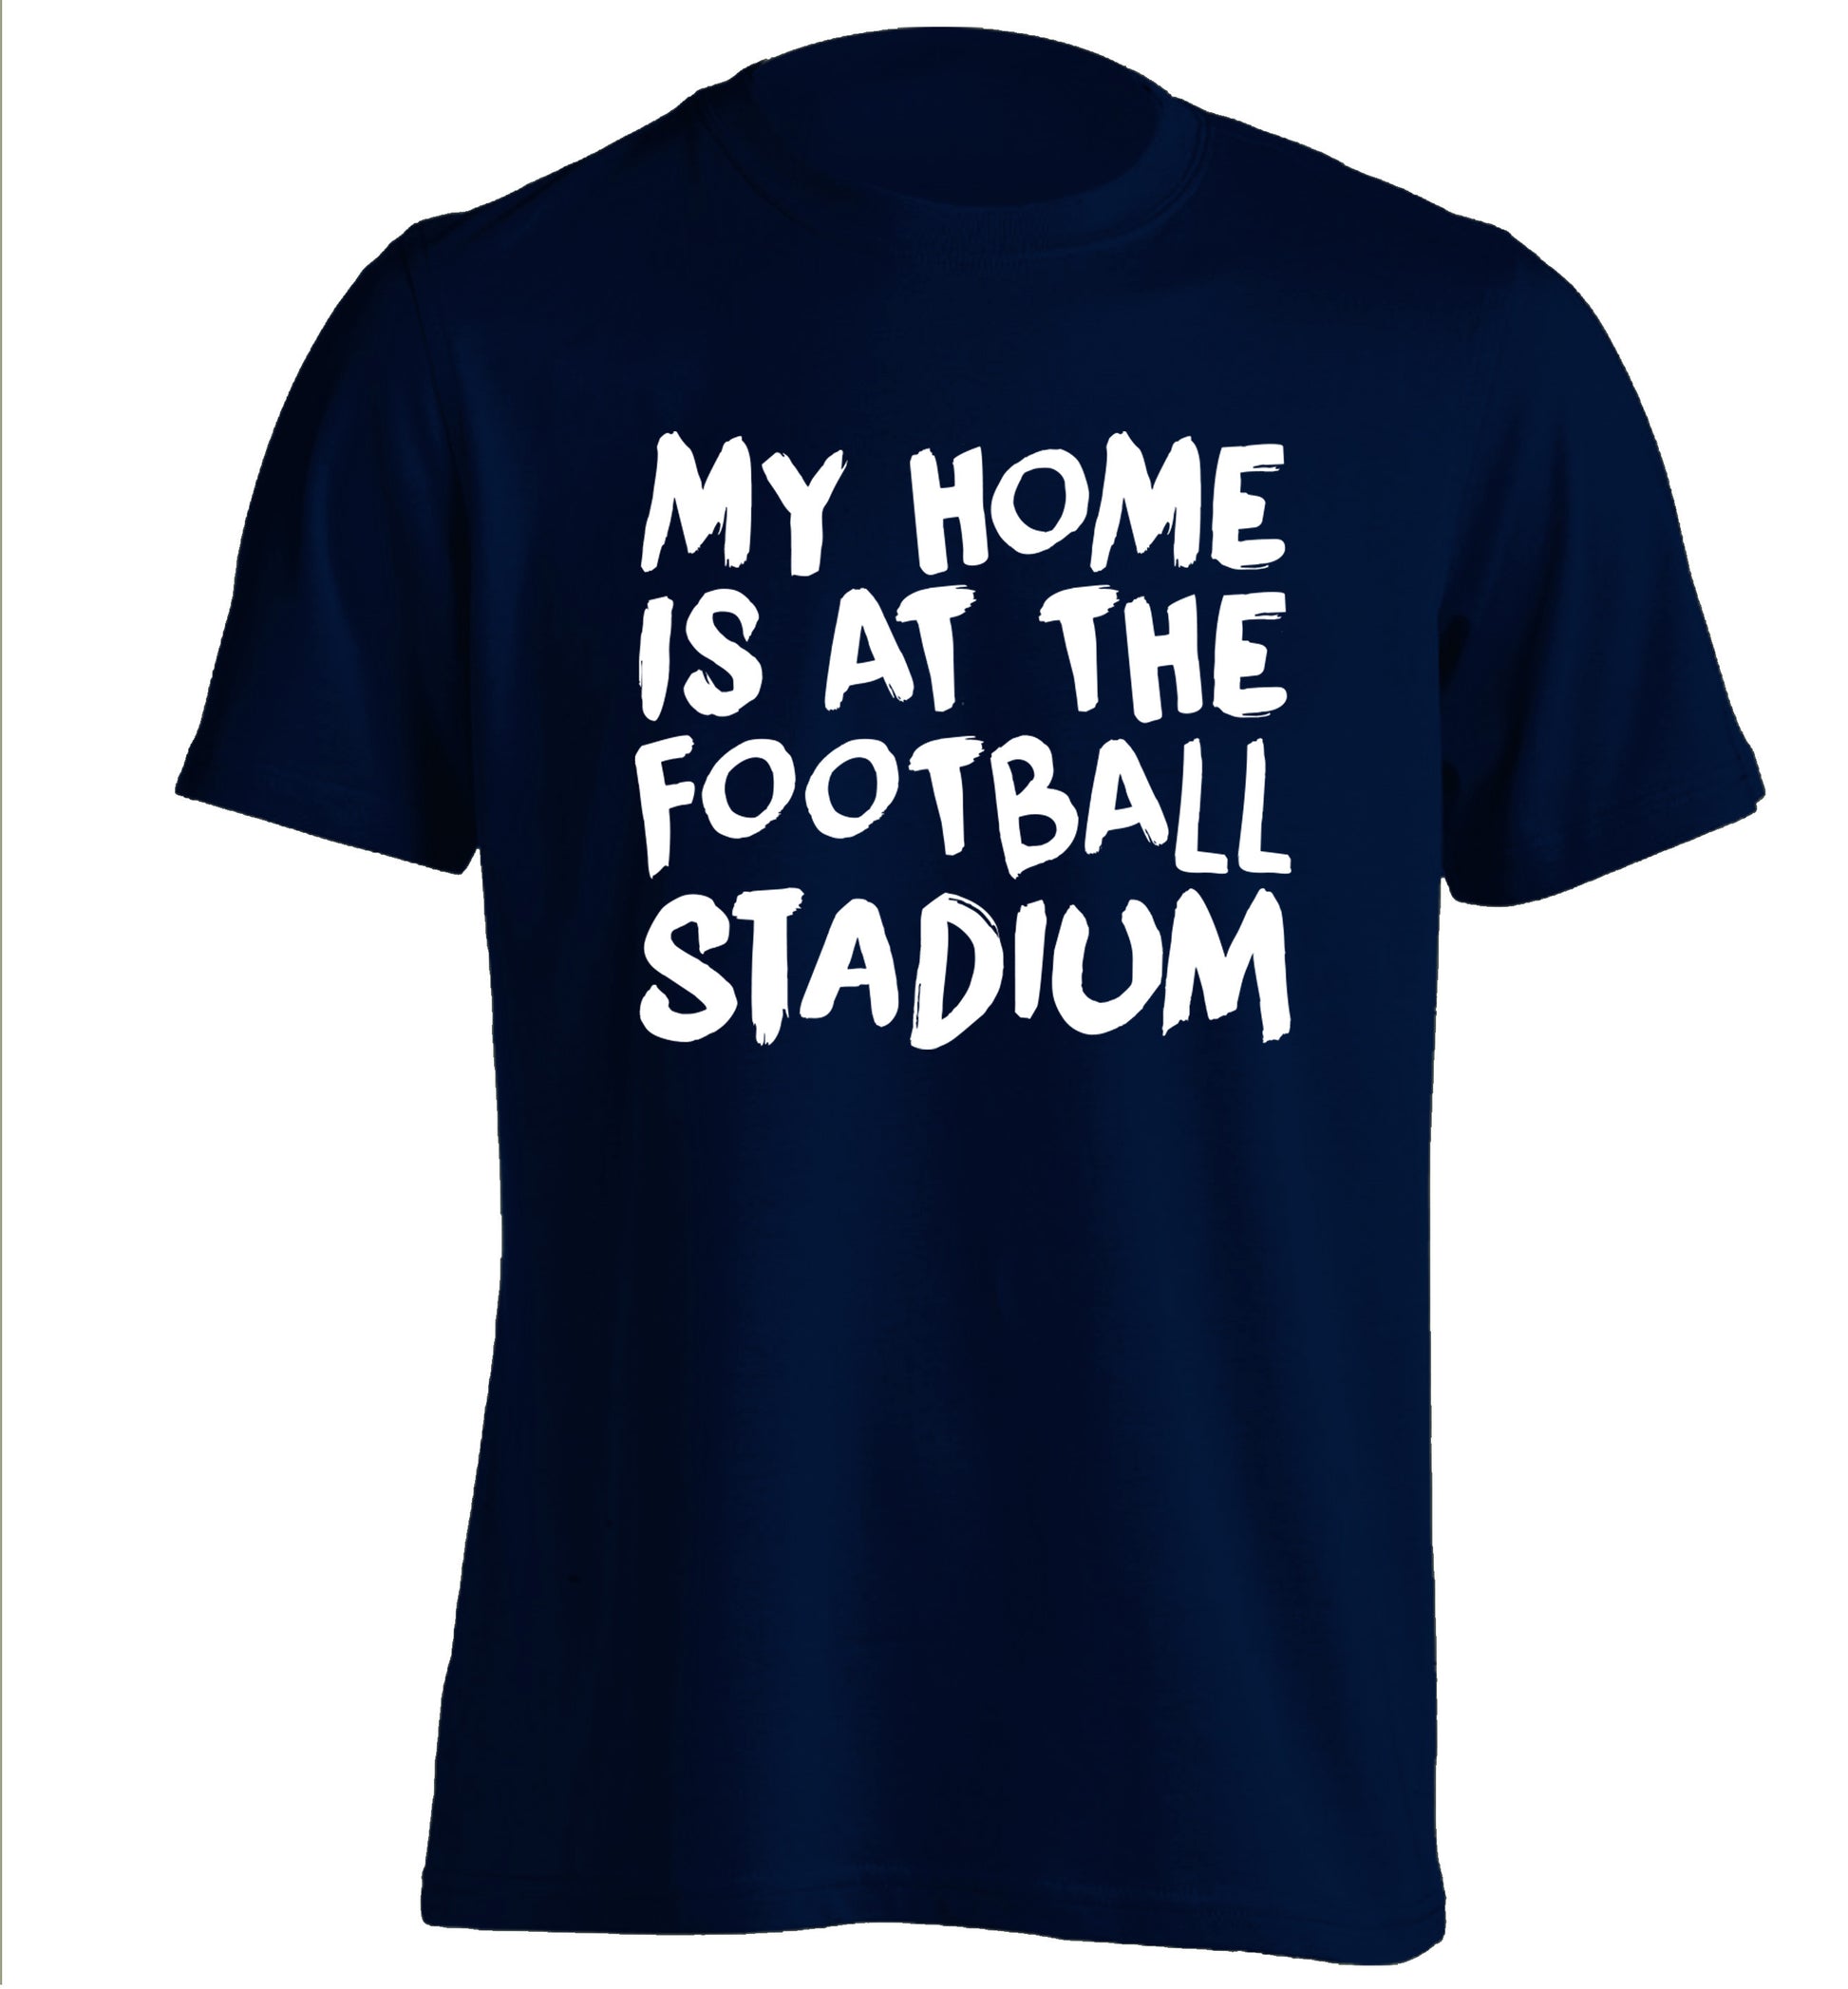 My home is at the football stadium adults unisex navy Tshirt 2XL